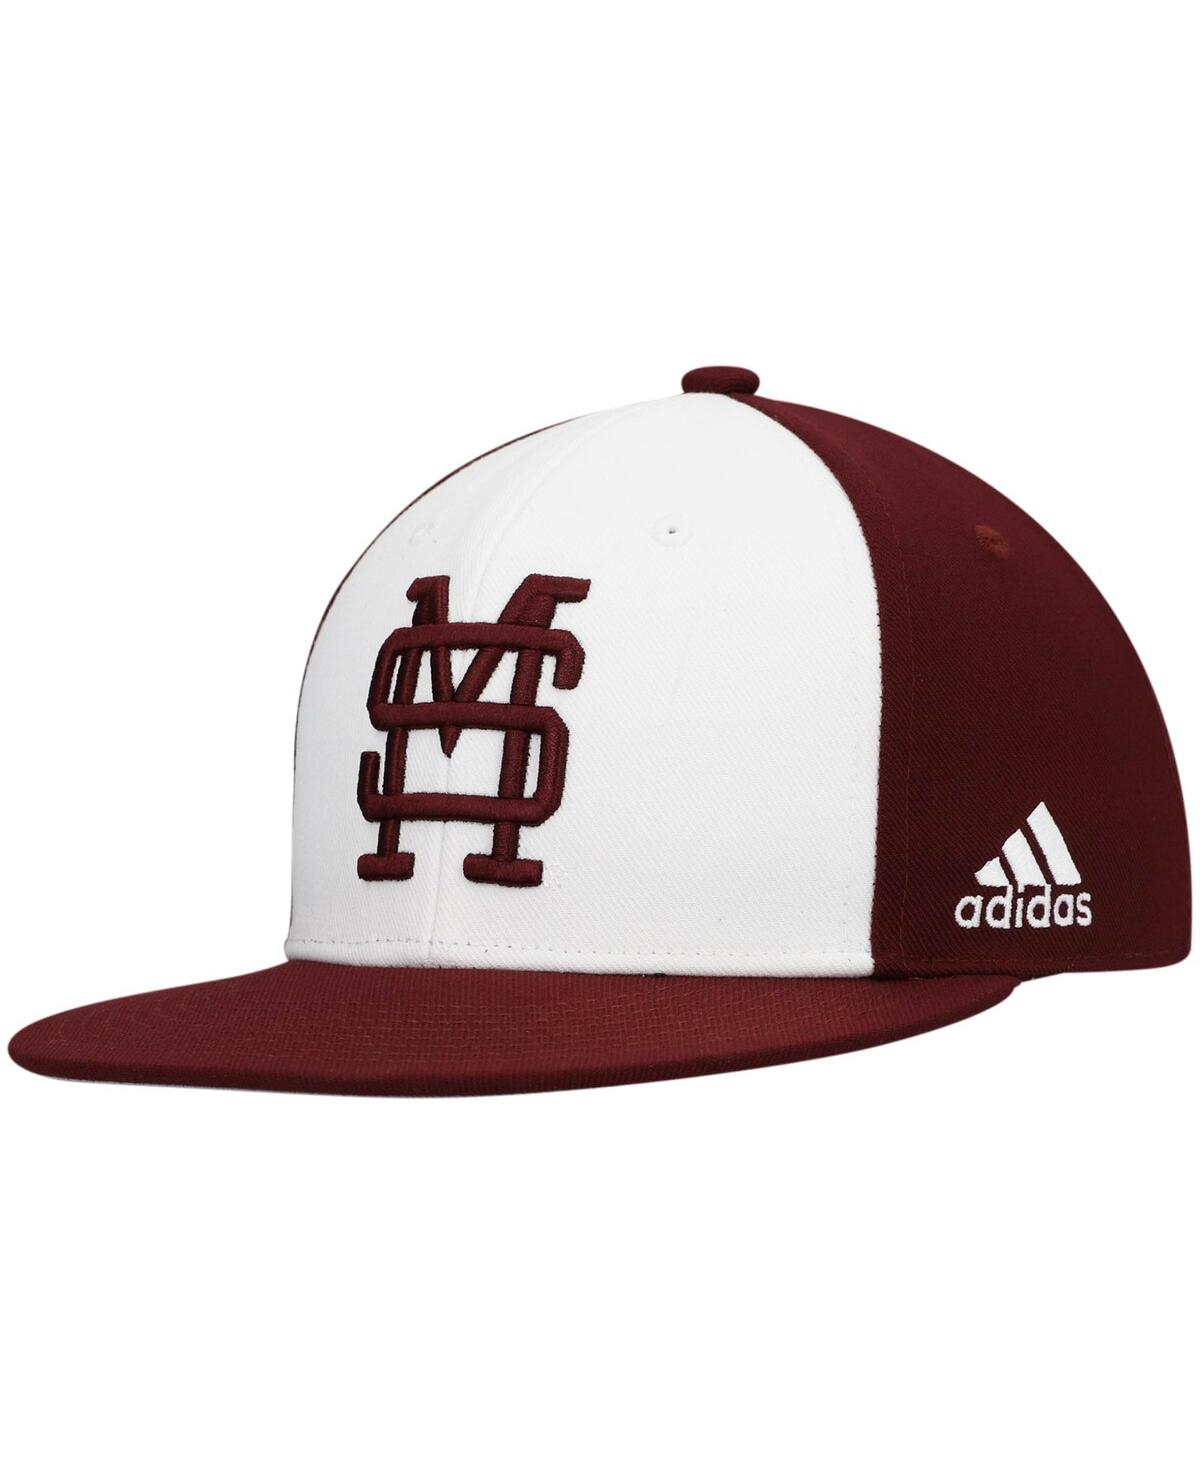 Shop Adidas Originals Men's Adidas White And Maroon Mississippi State Bulldogs Team On-field Baseball Fitted Hat In White,maroon